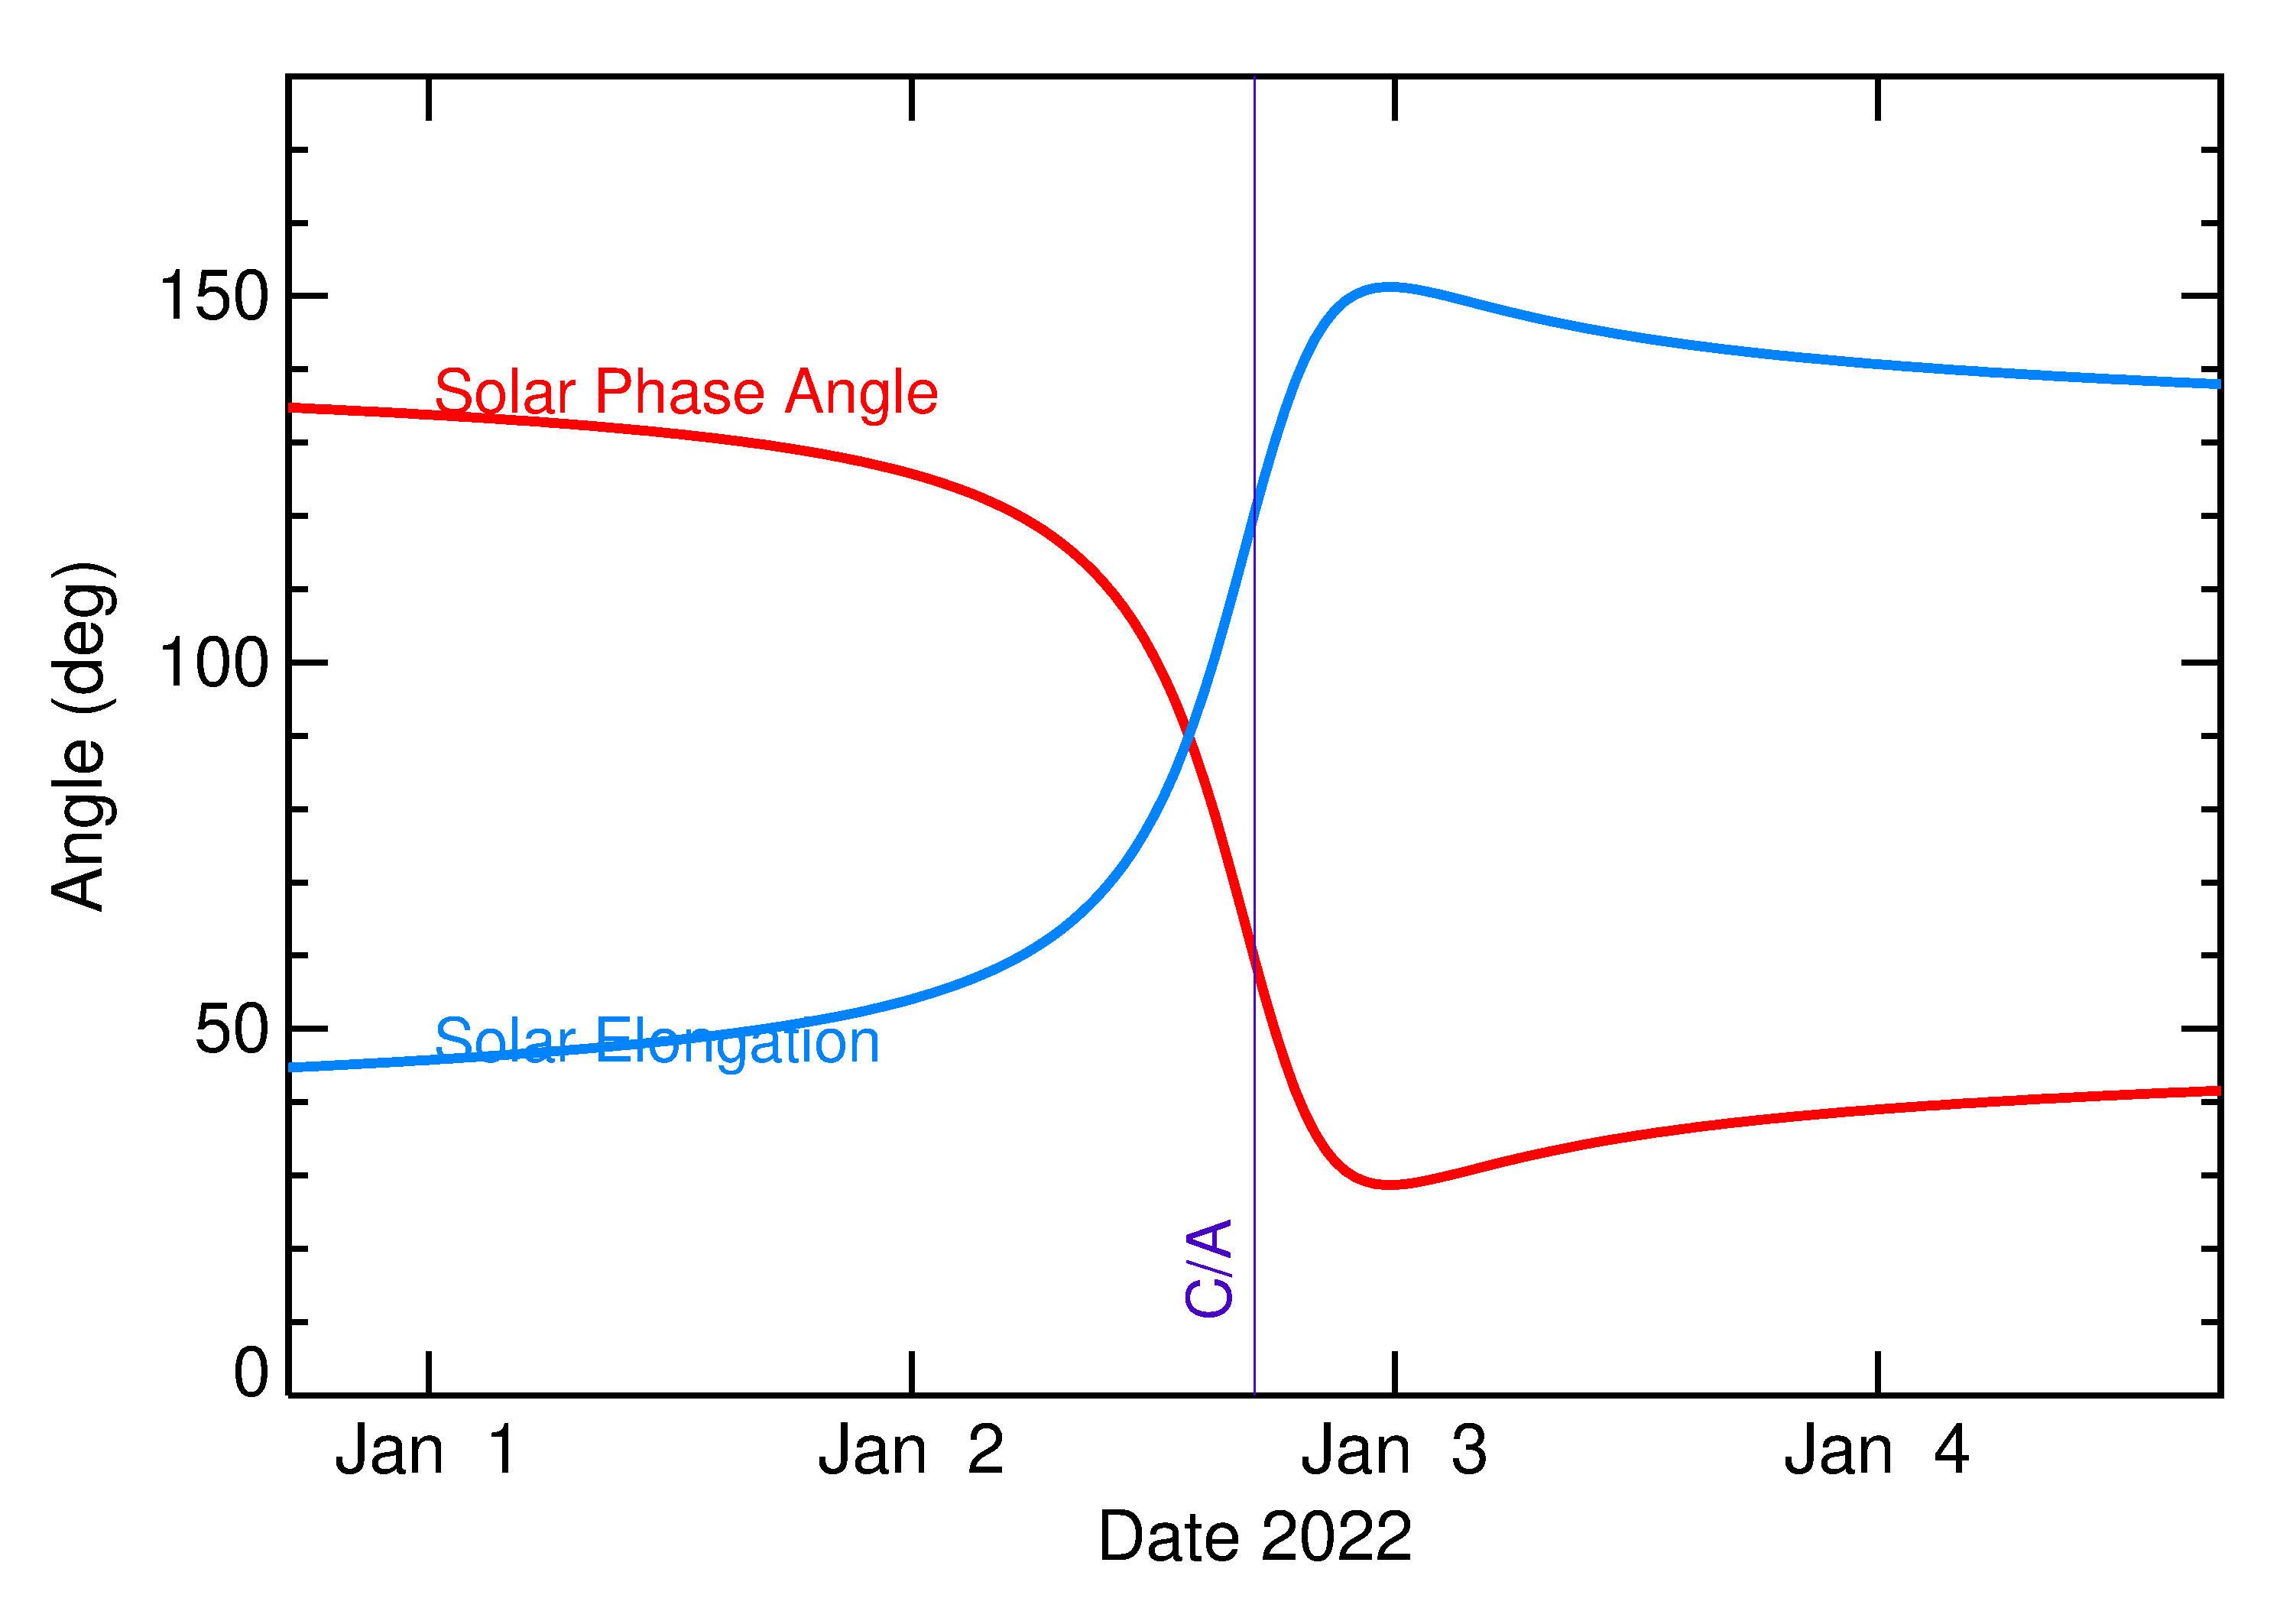 Solar Elongation and Solar Phase Angle of 2022 AP1 in the days around closest approach